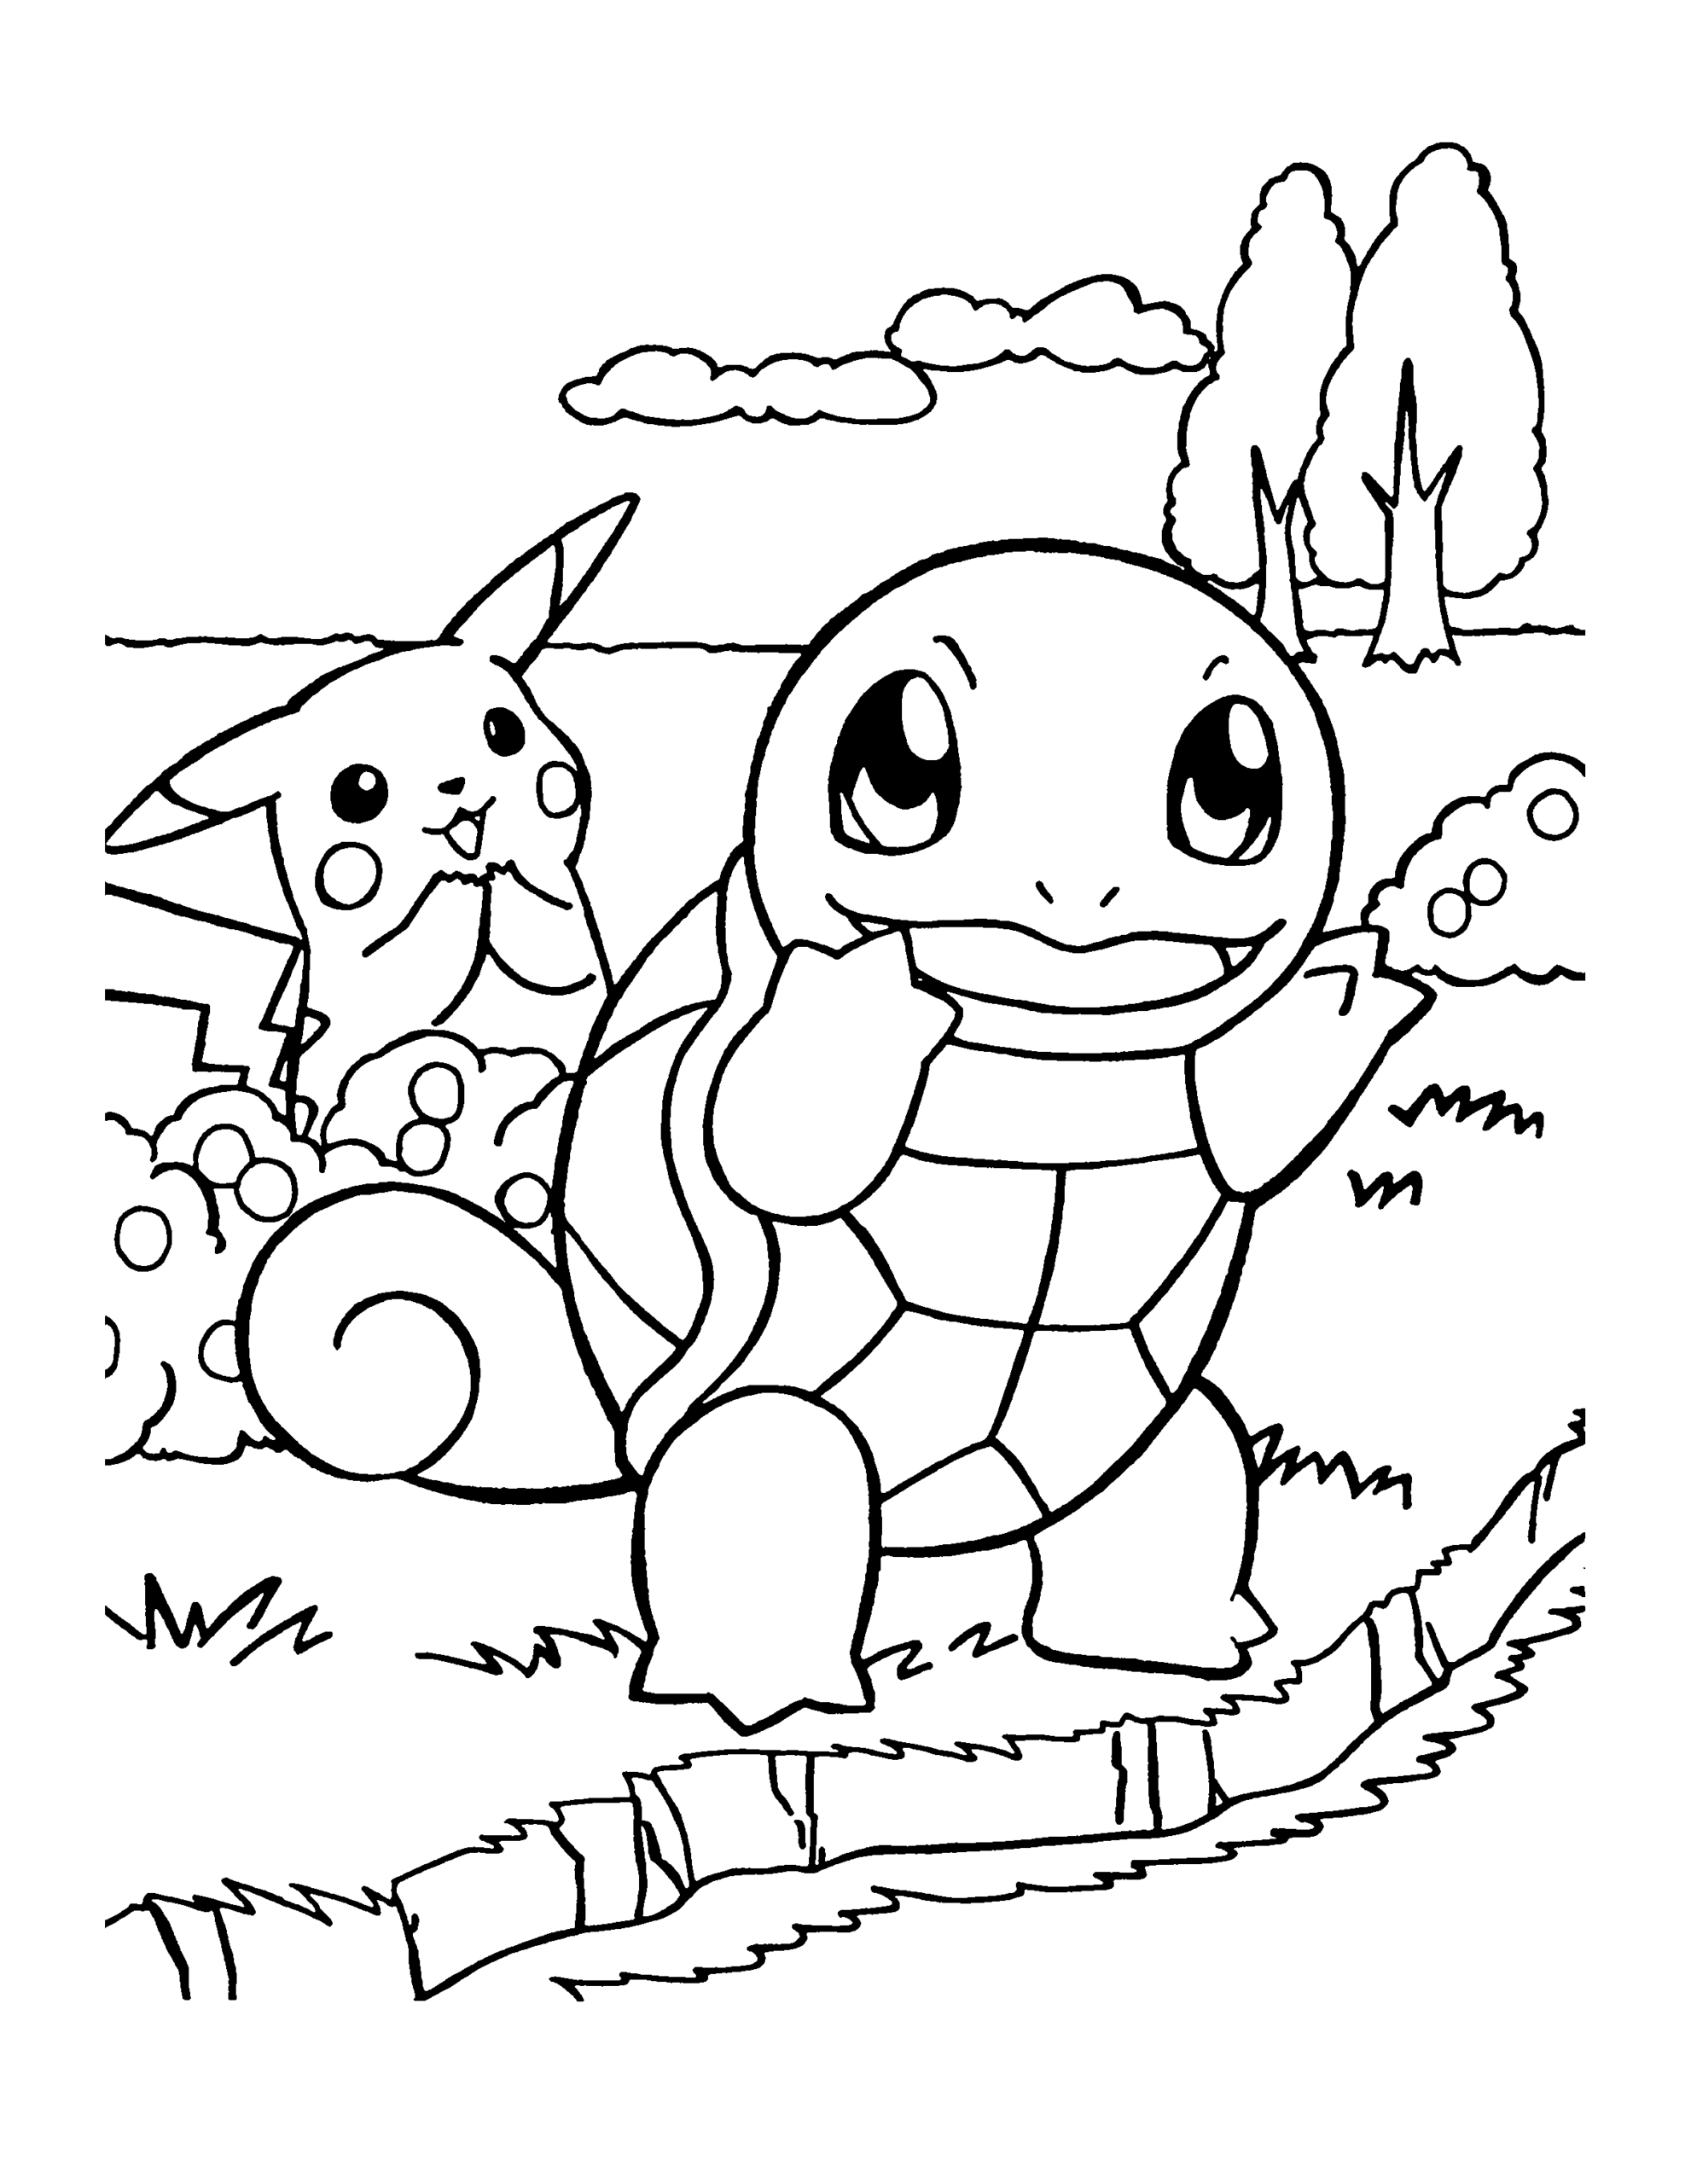 squirtle and pikachu coloring pages